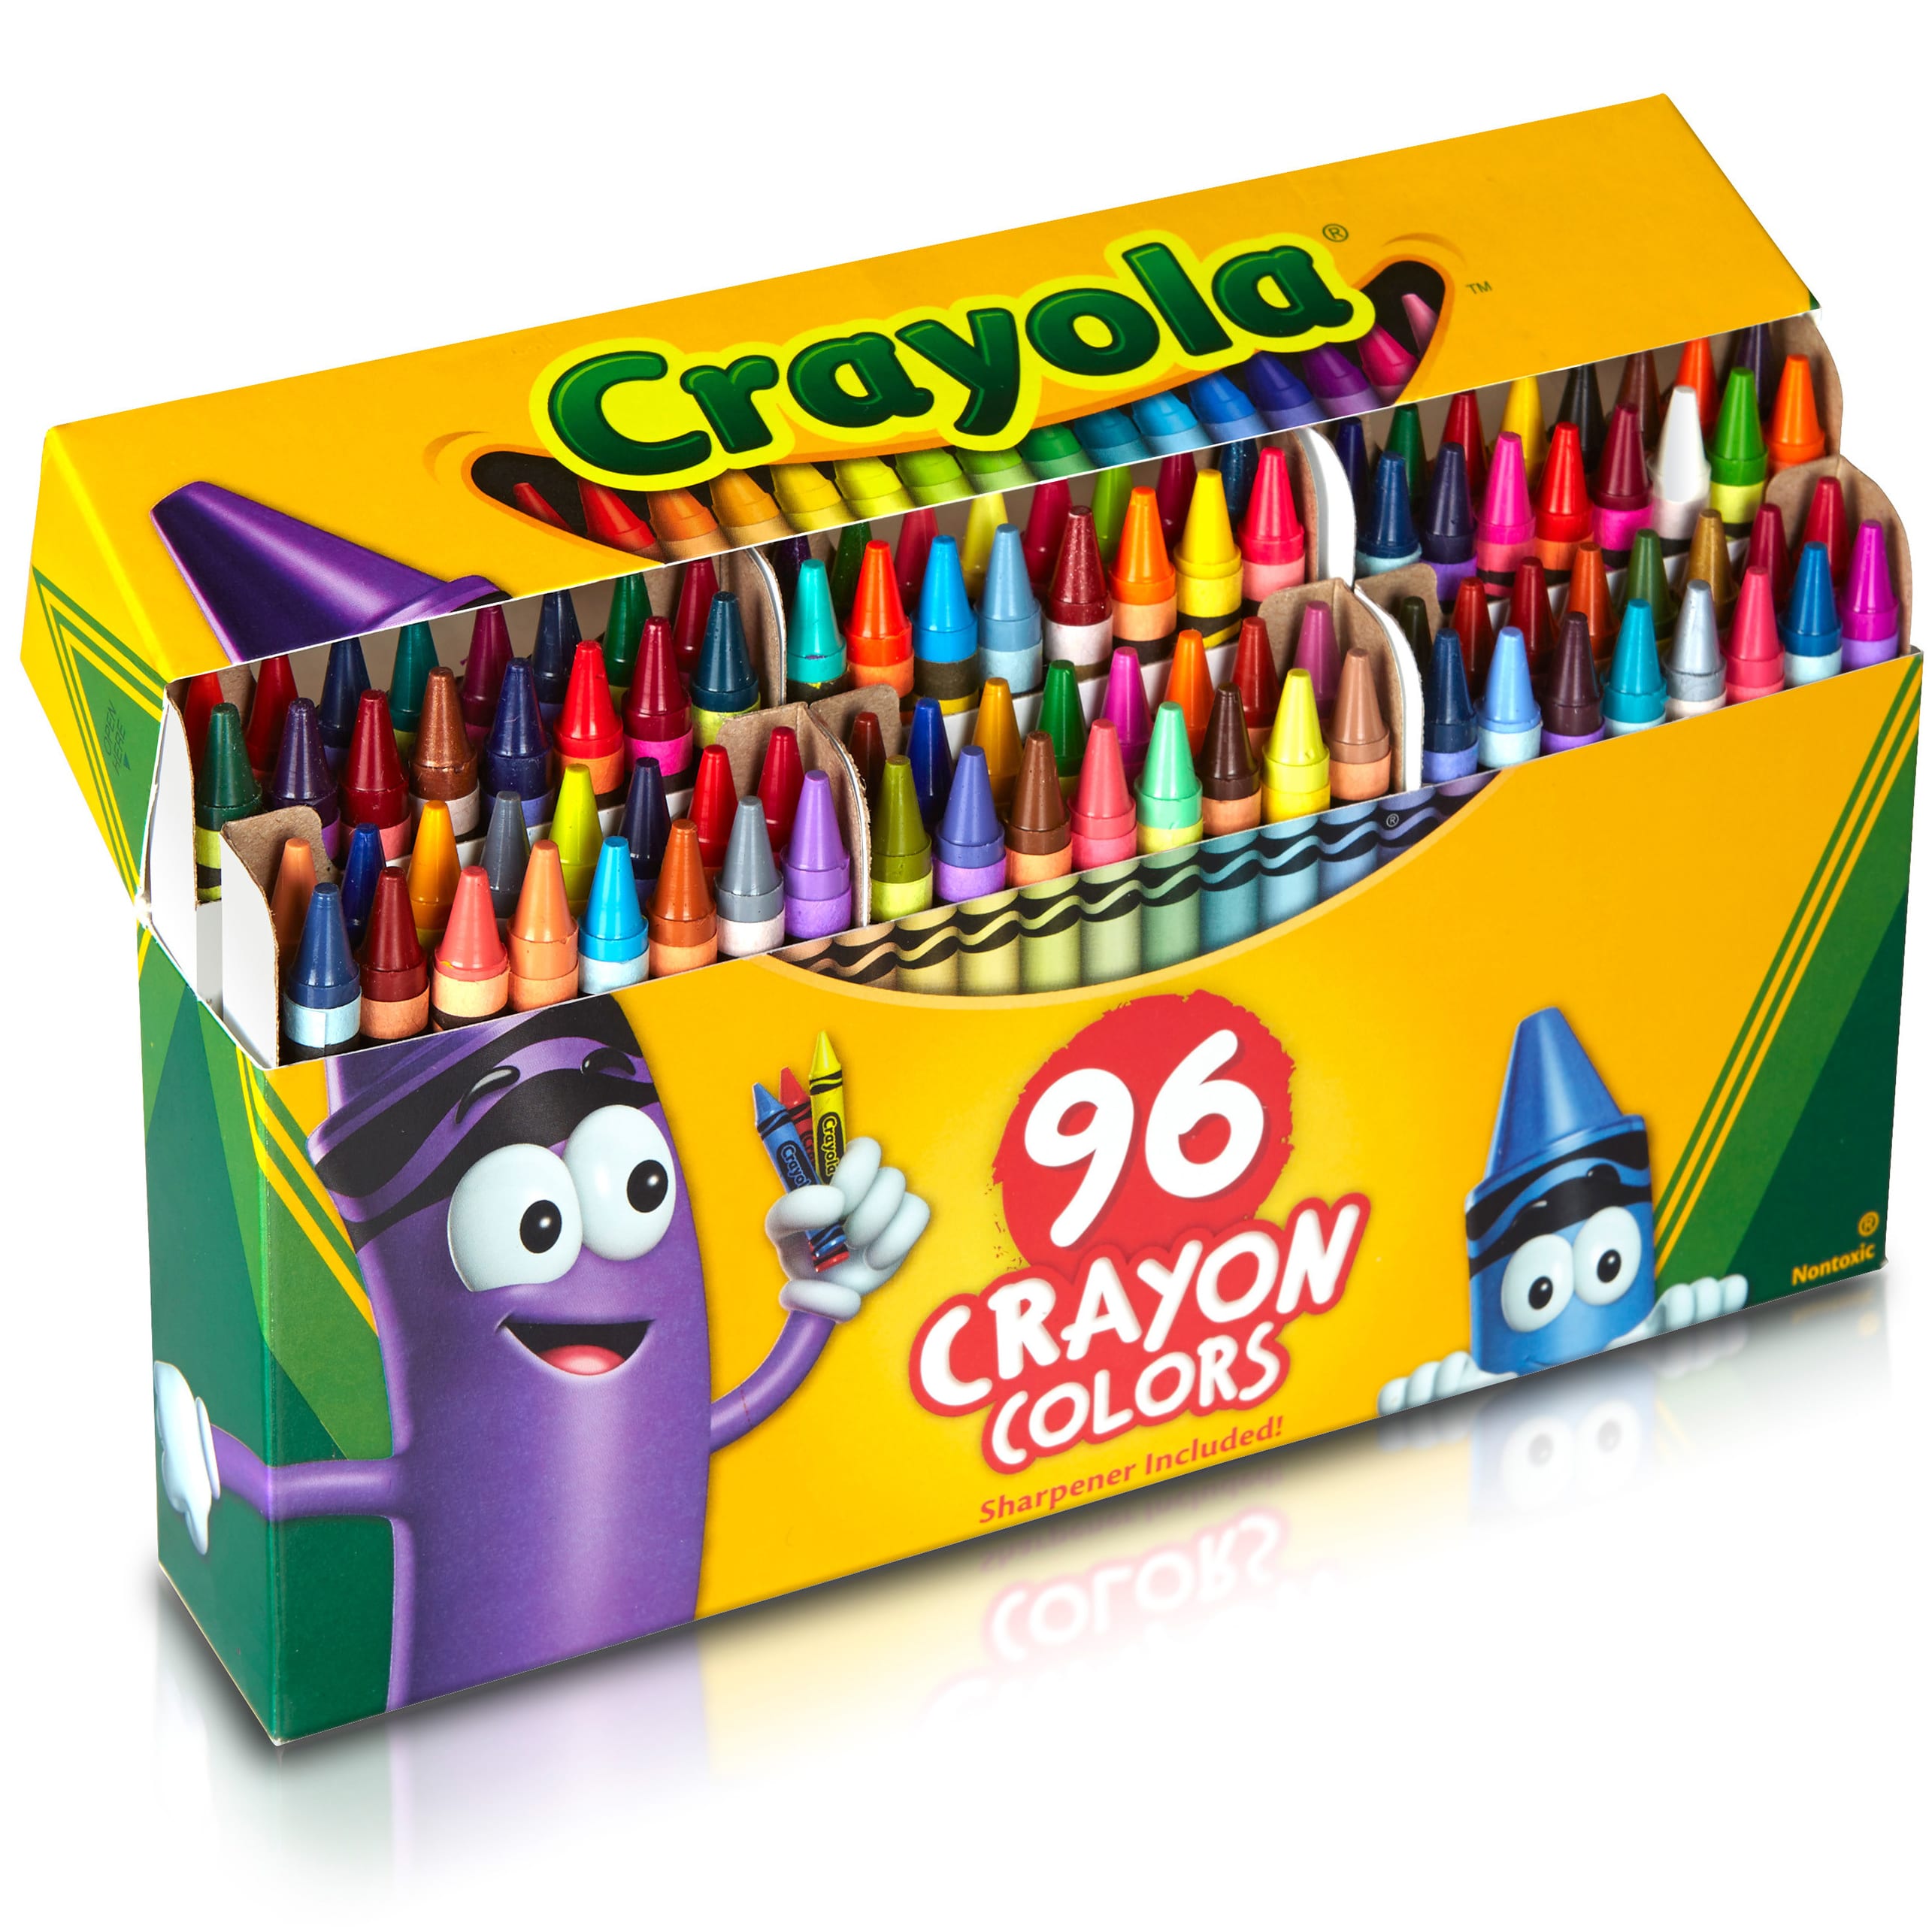 Crayola Crayon Set, 96-Colors, School Supplies, Art Gifts for Kids - image 1 of 12